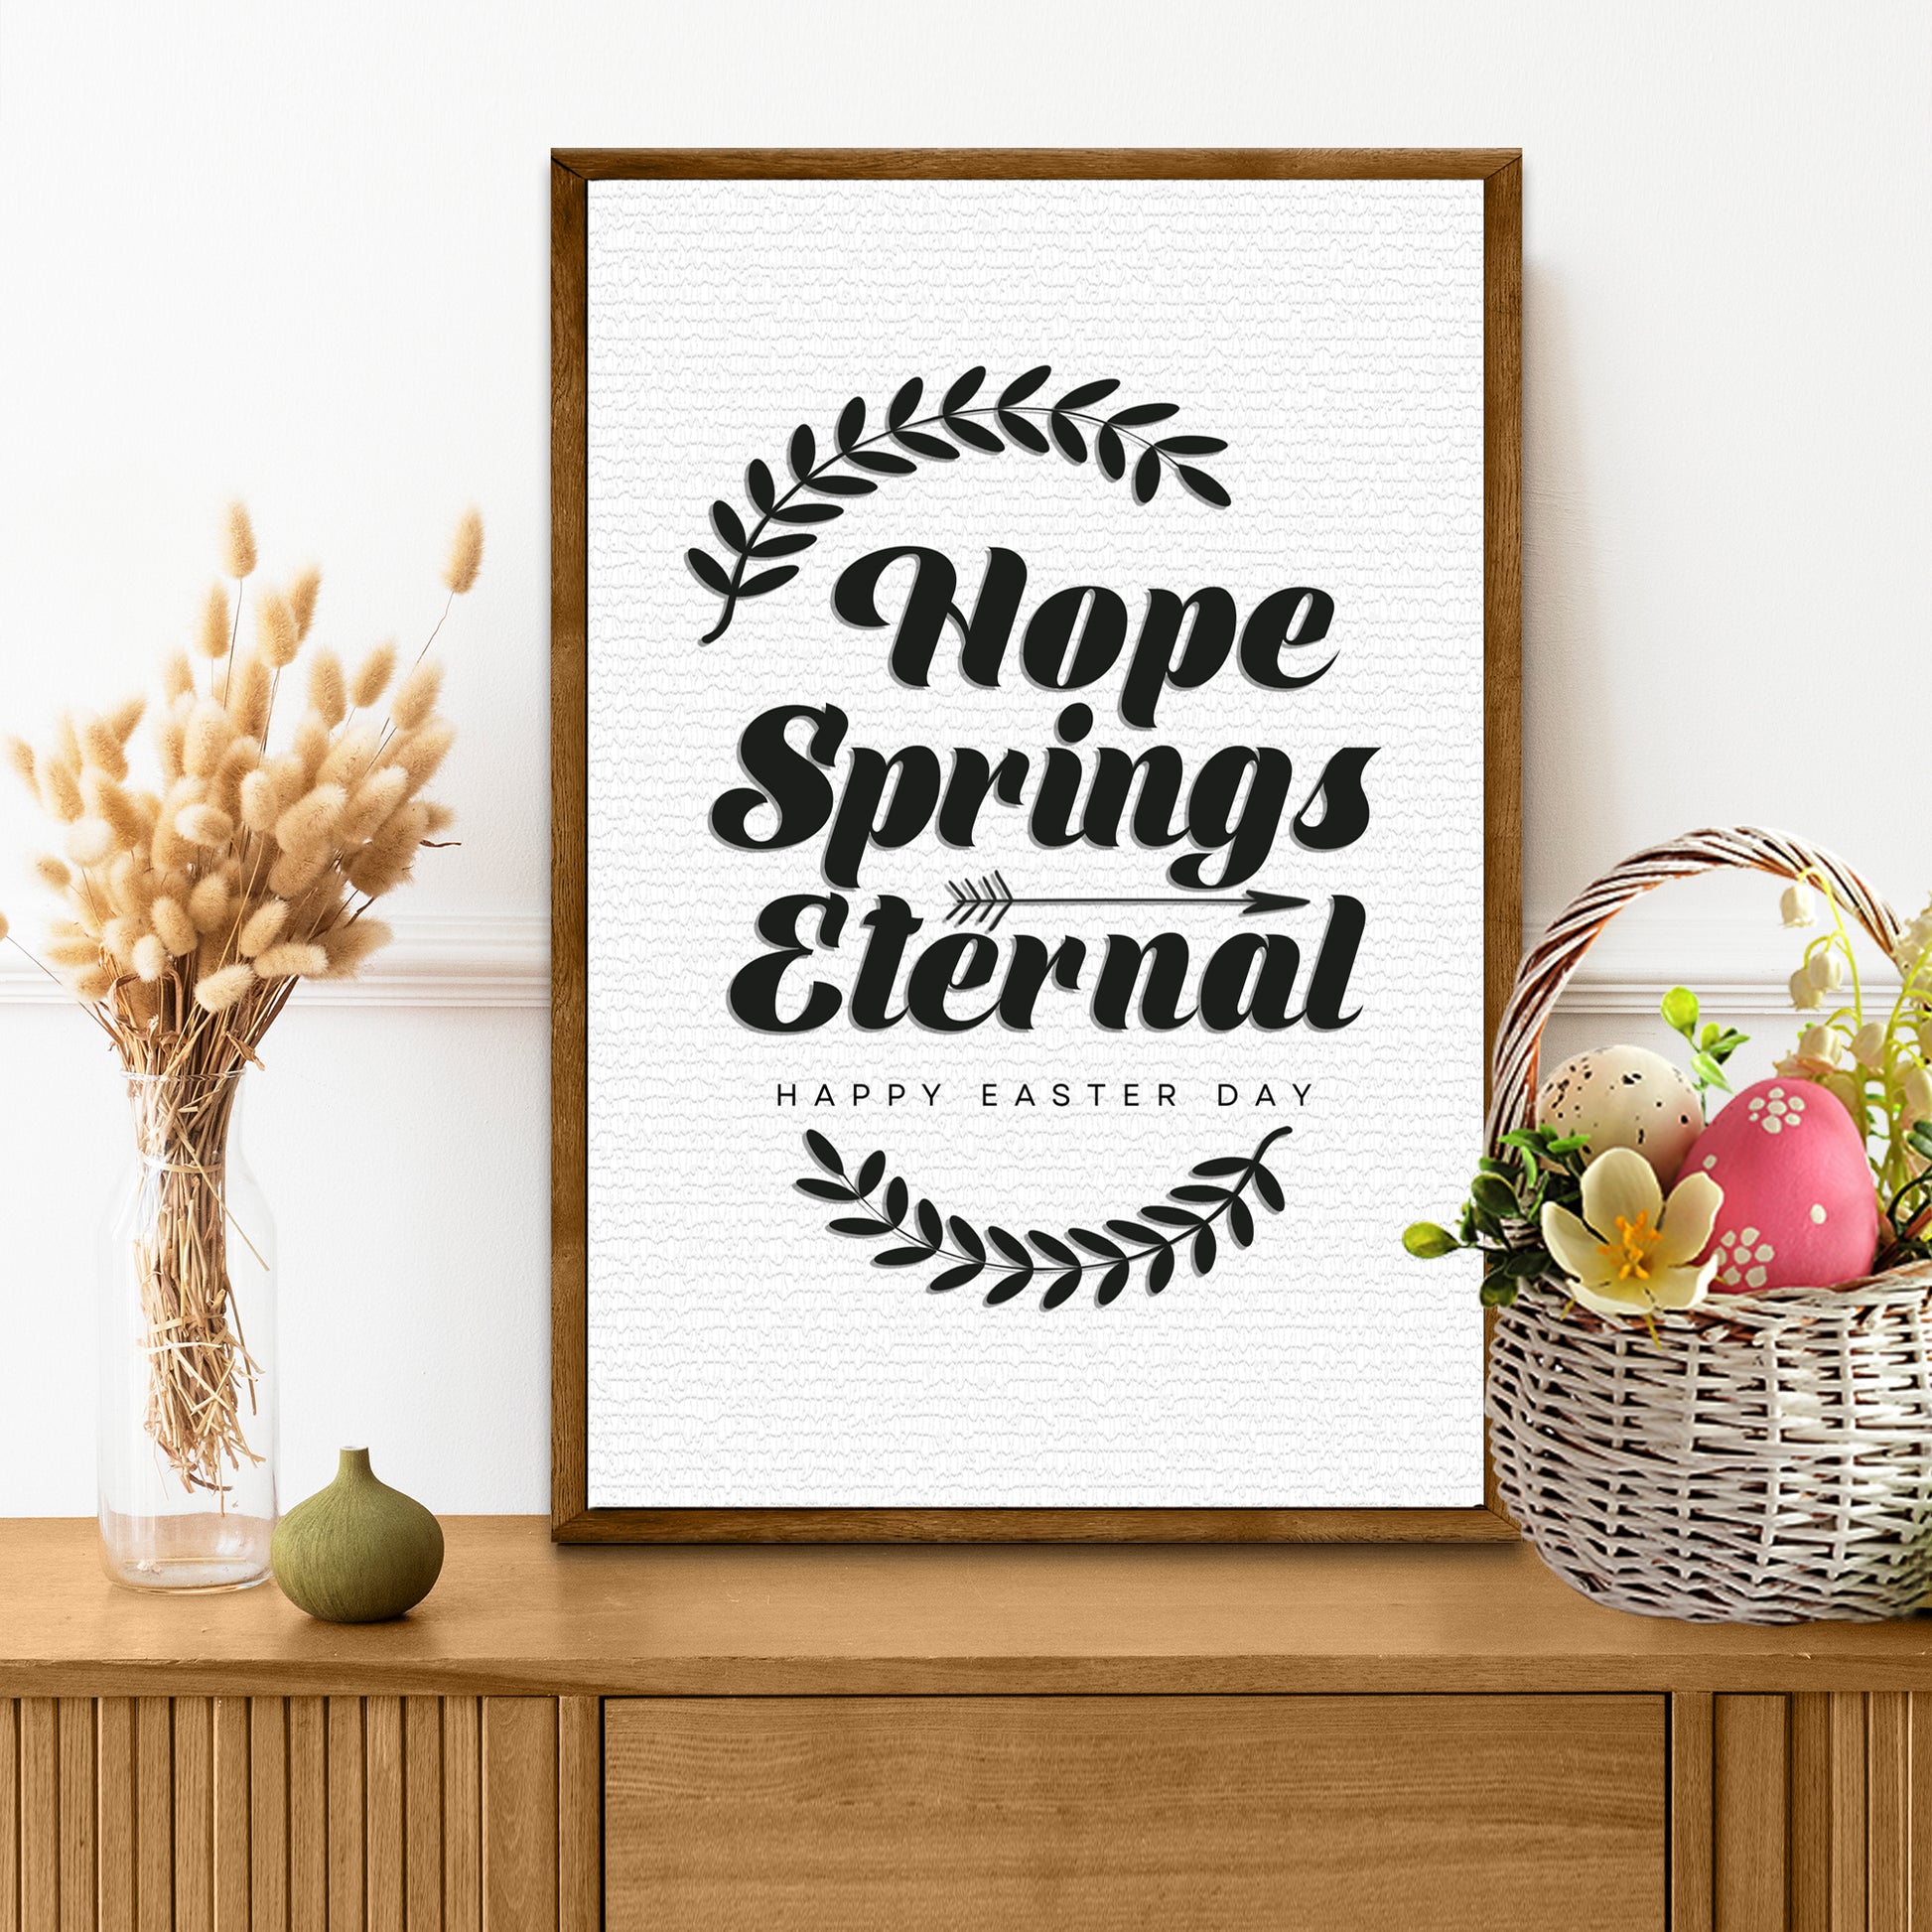 Hope Springs Eternal Sign II - Image by Tailored Canvases